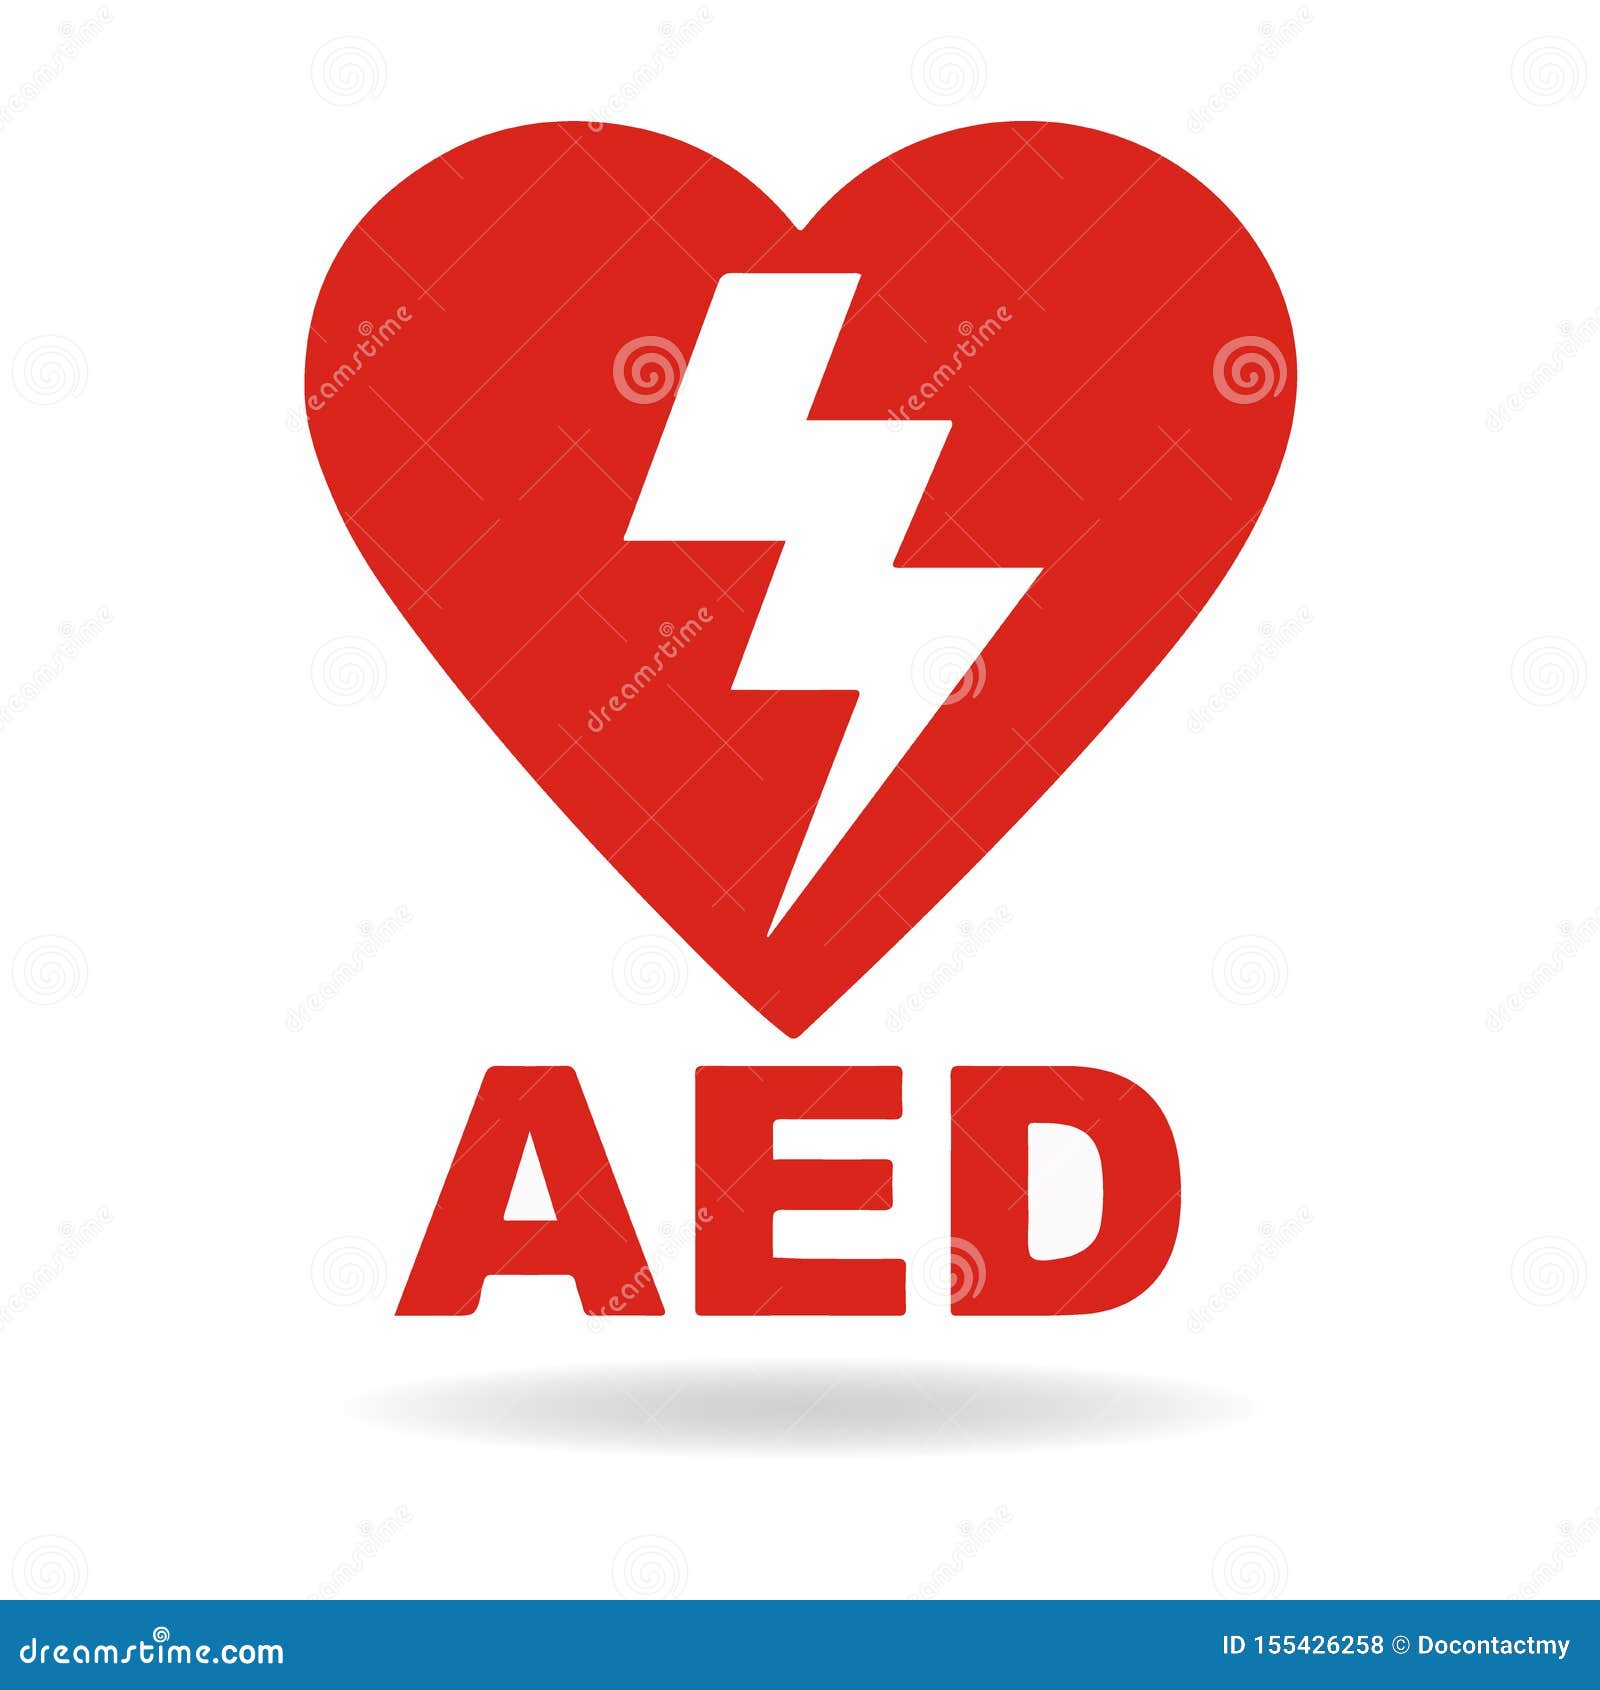 aed emergency defibrillator aed icon icons medical logo cpr  eps  location automated external